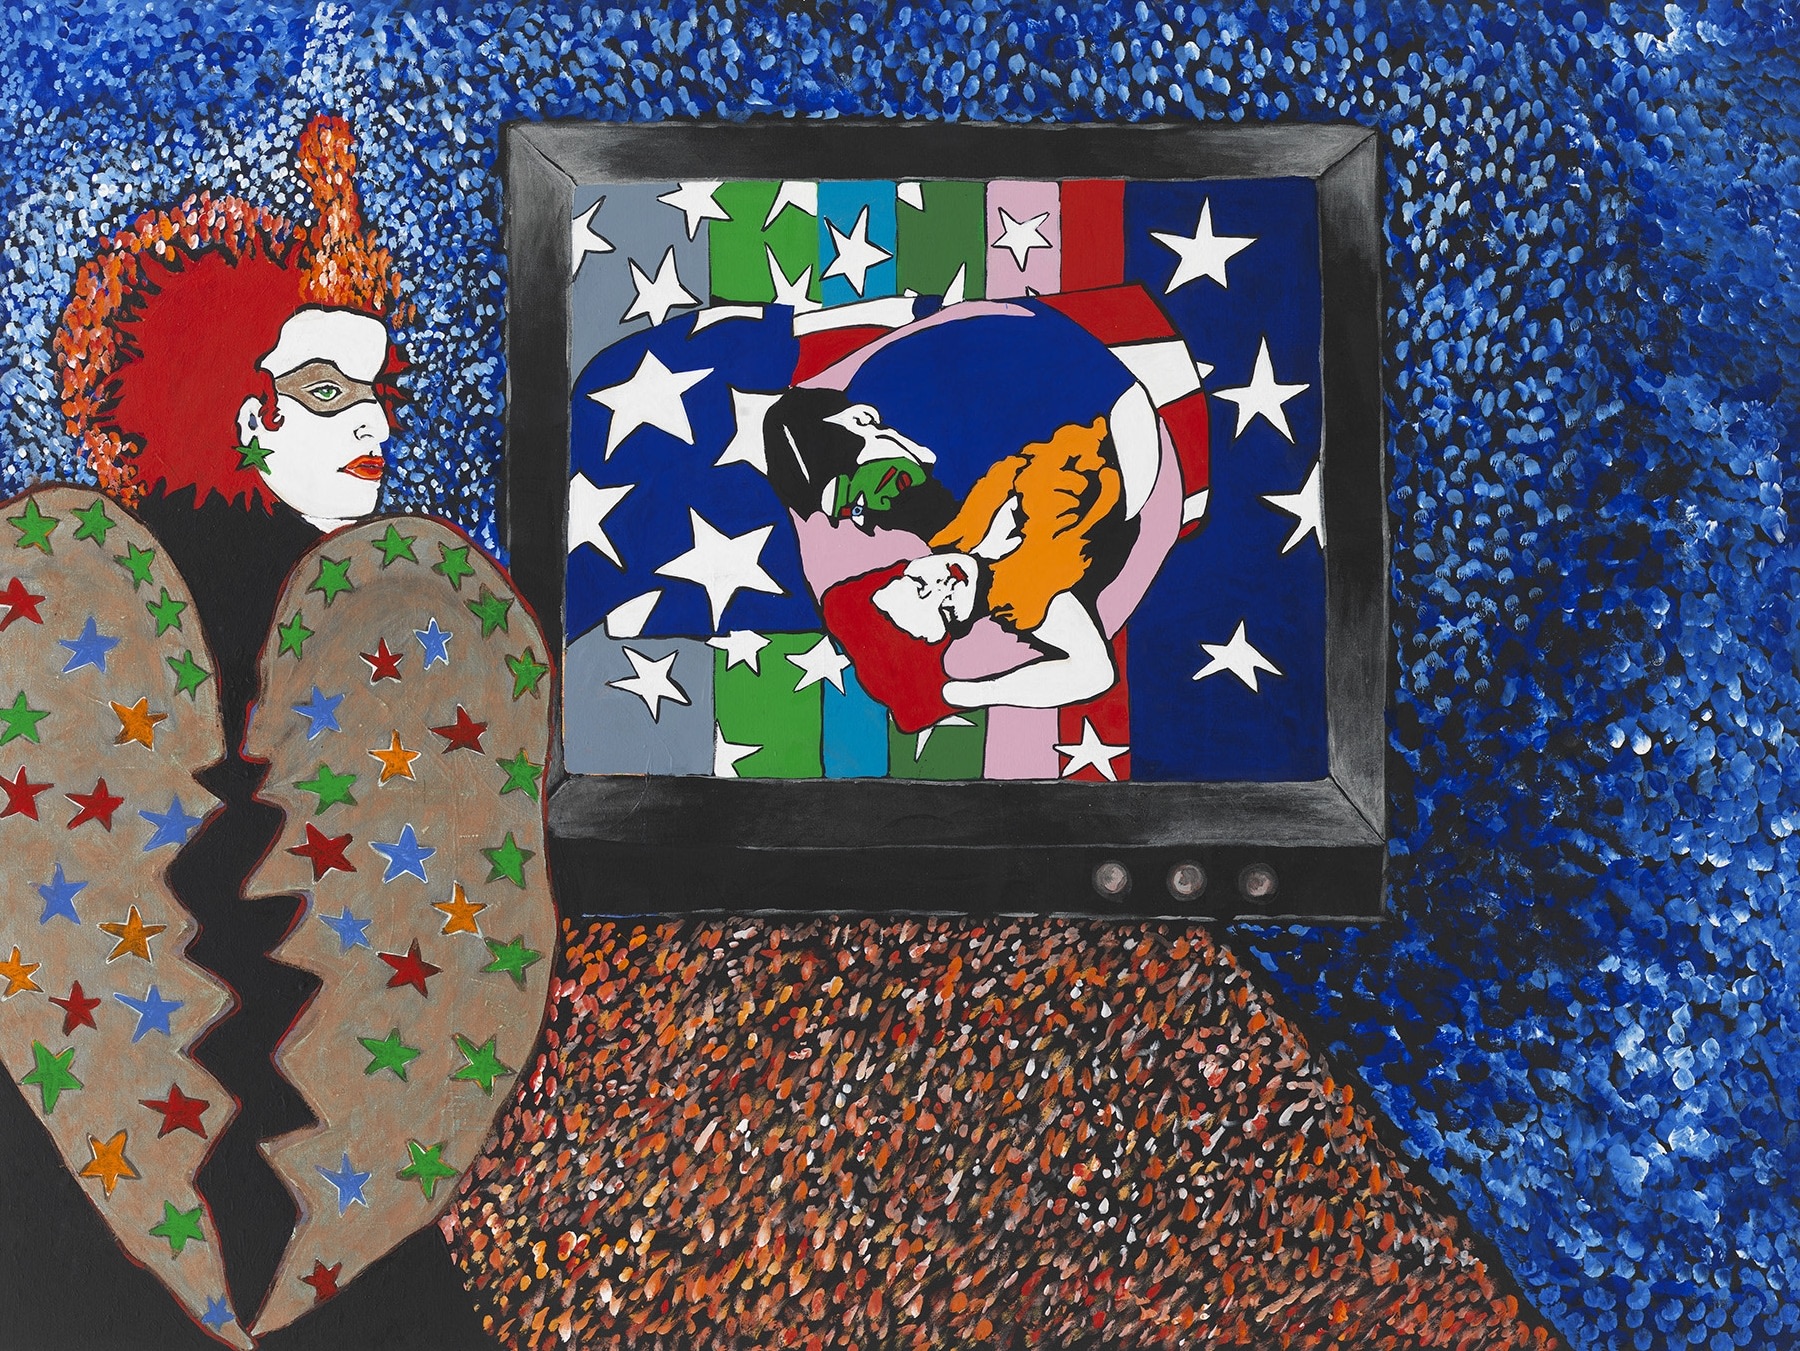 Midnight Blue, 1989, Acrylic and paper collage on canvas